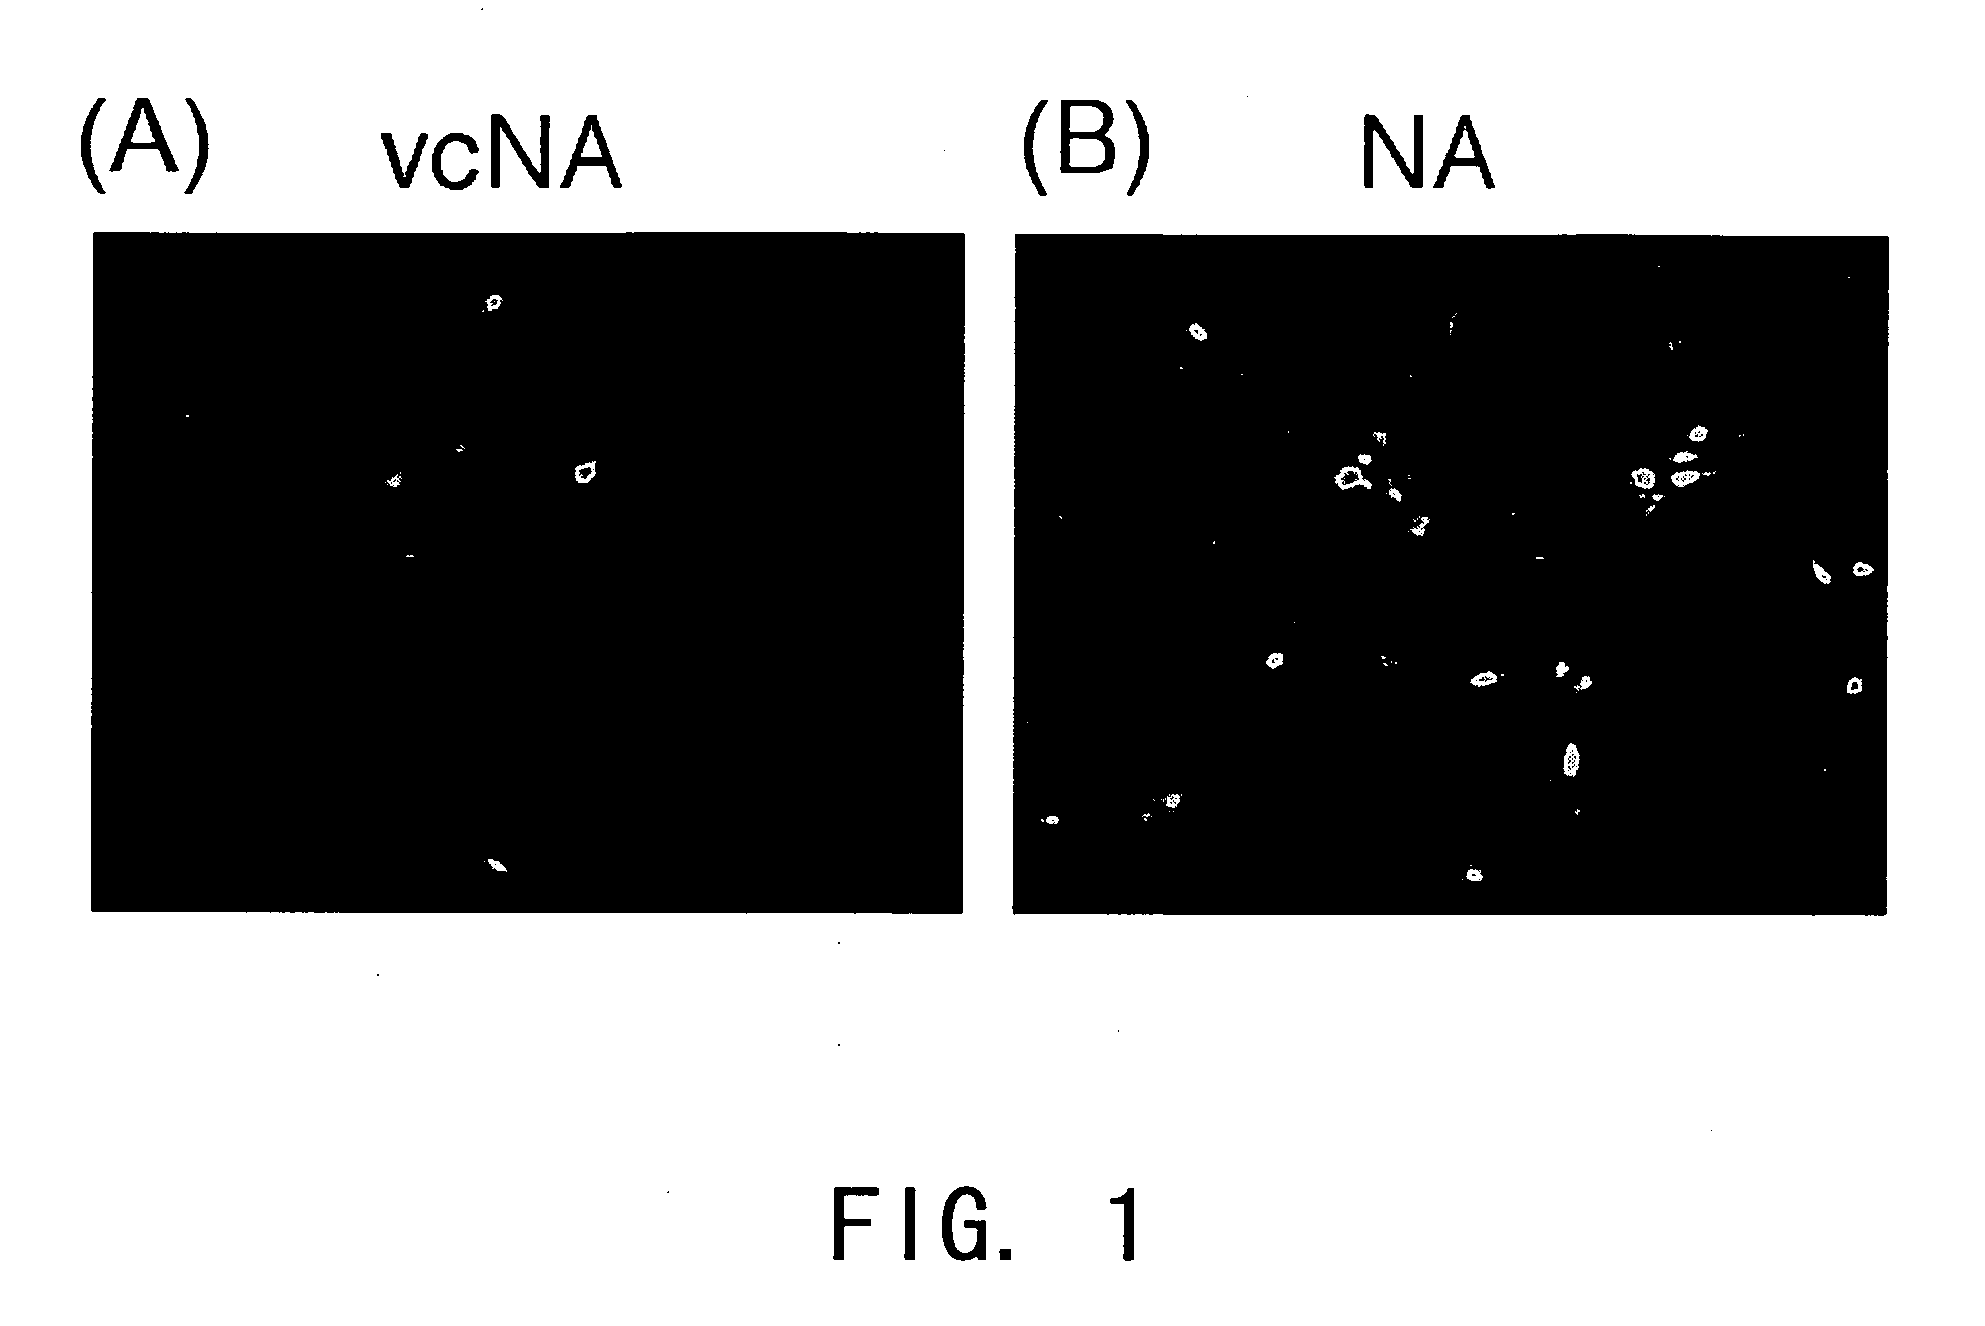 Process for producing virus vector containing membrane protein having sialic acid-binding in envelope with the use of gram-positive bacterium origin nueraminidase